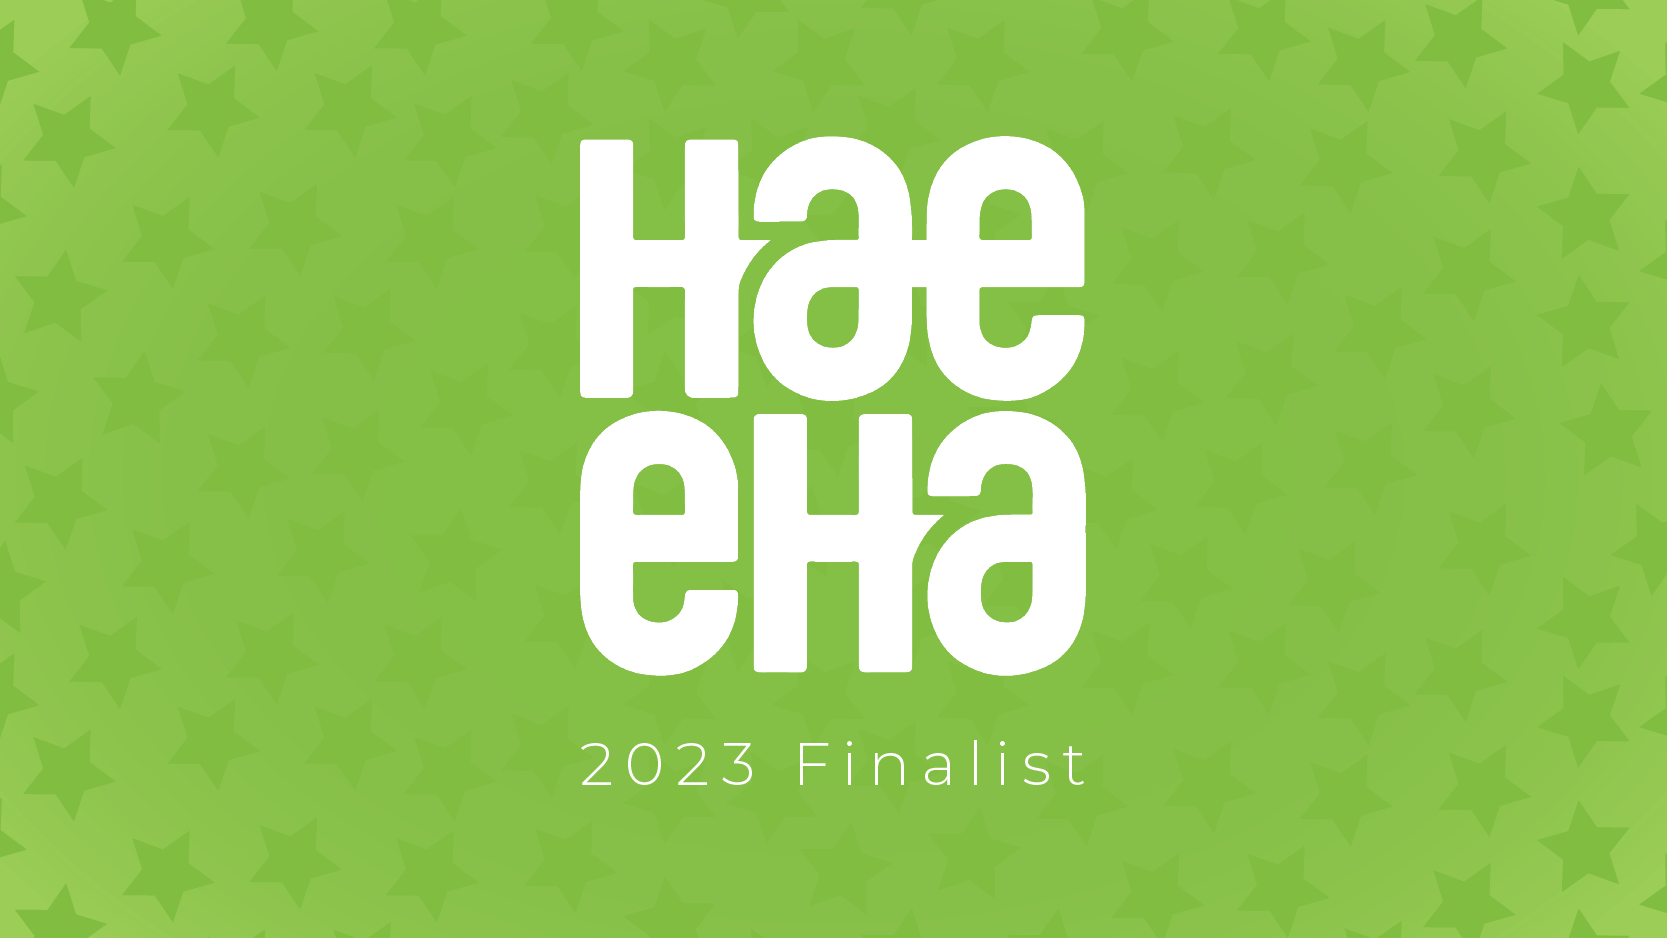 2023 HAE EHA Awards Finalists graphic, white text on green background with stars